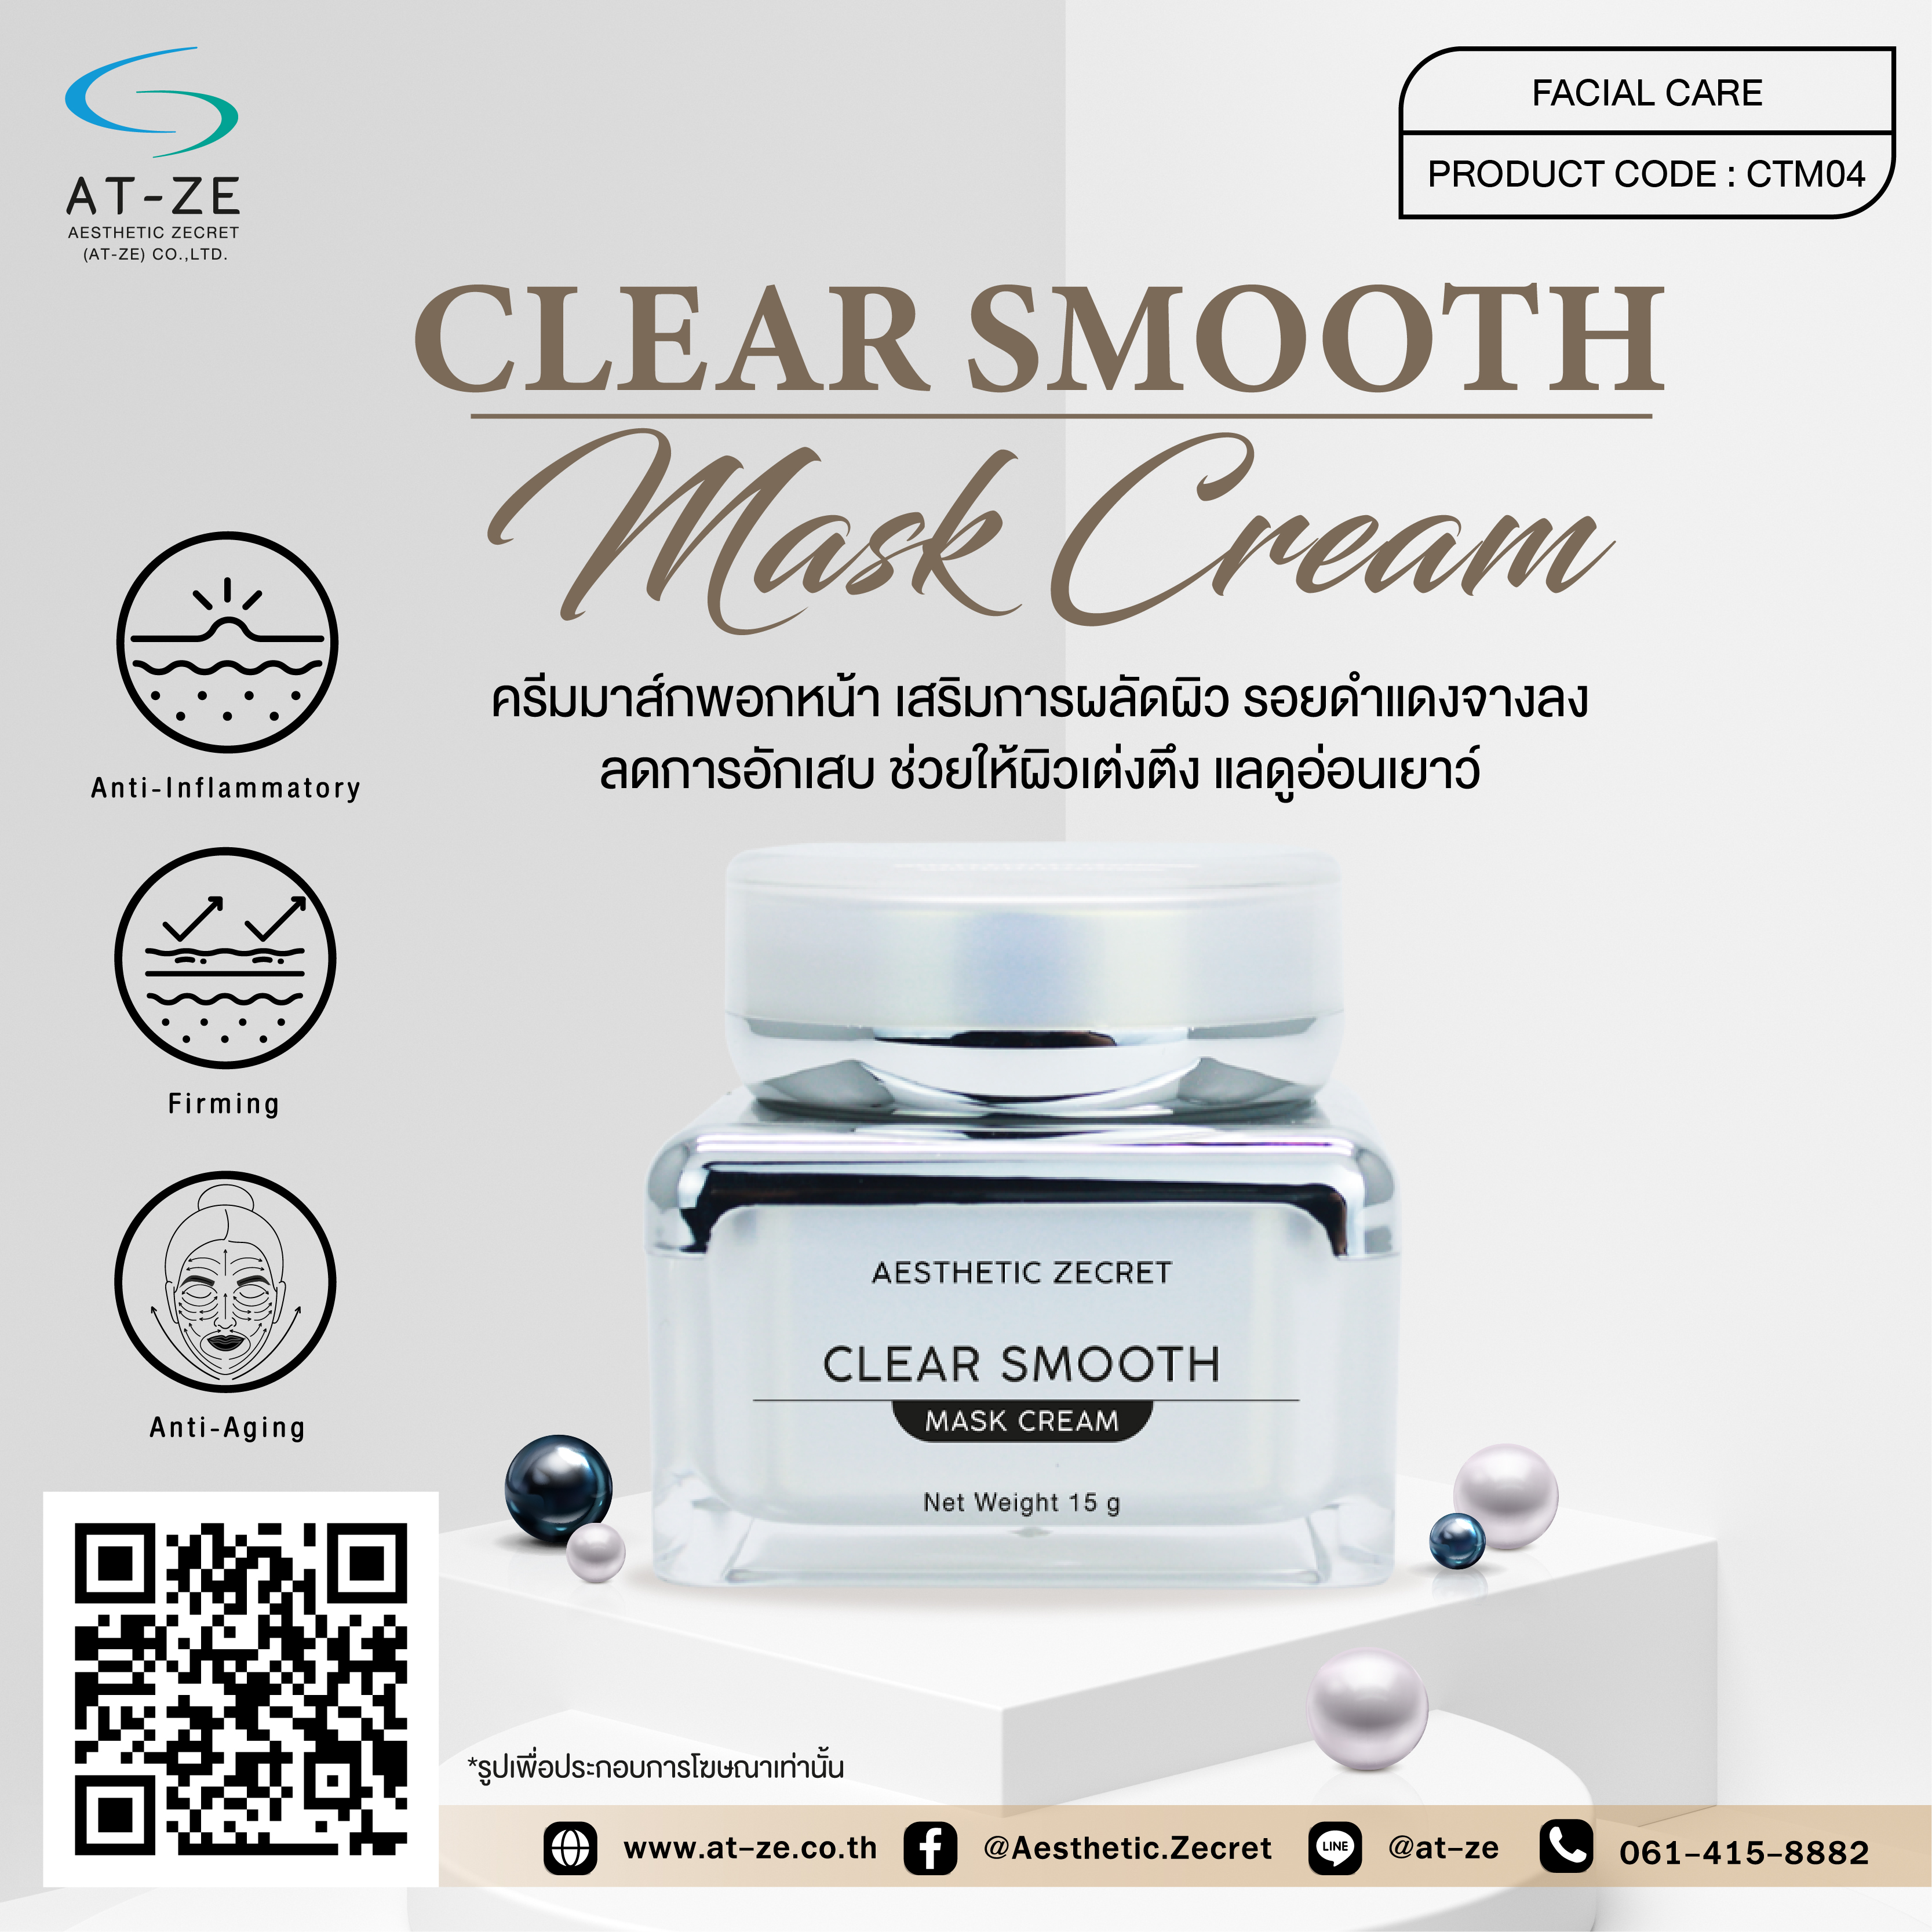 CLEAR SMOOTH MASK CREAM